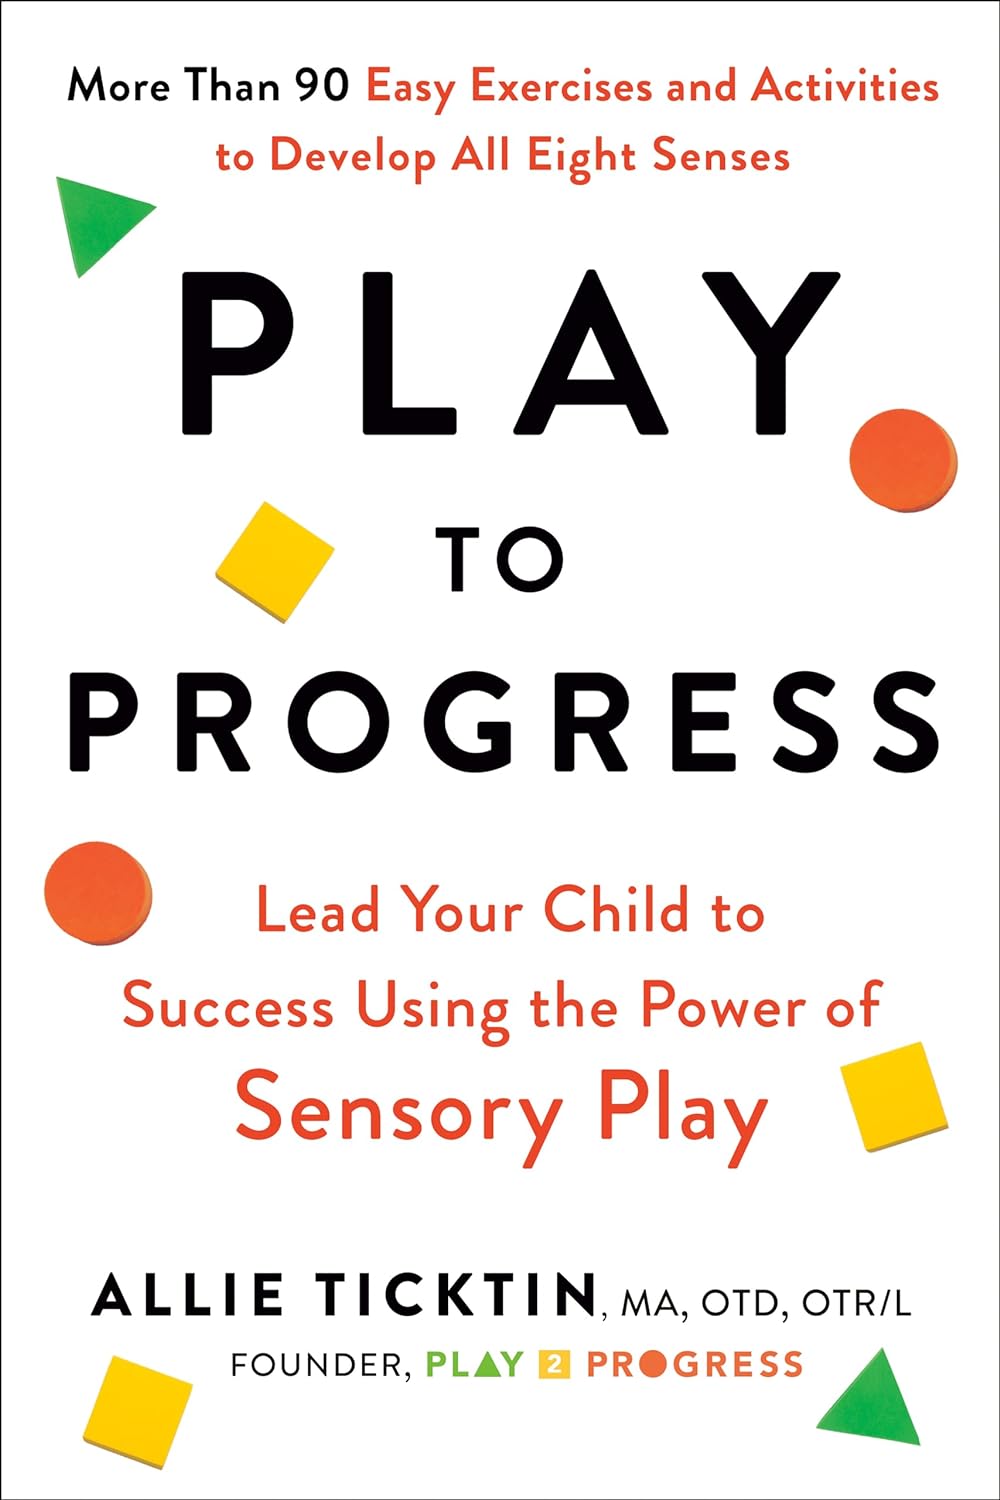 Play to Progress: Lead Your Child to Success Using the Power of Sensory Play.